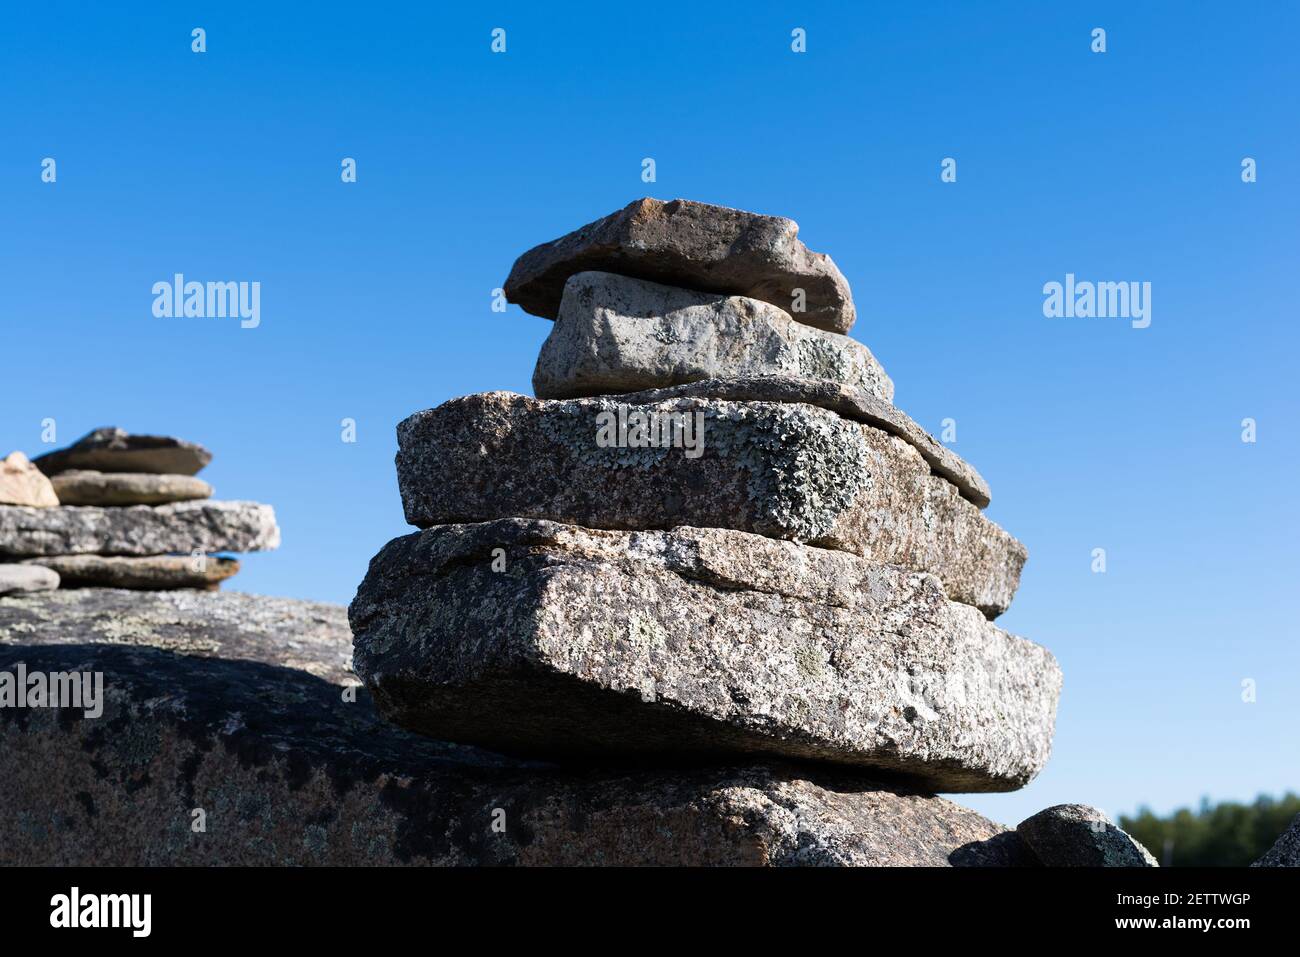 Wide view of two small stacks of rocks on a boulder in the early morning light. Stock Photo